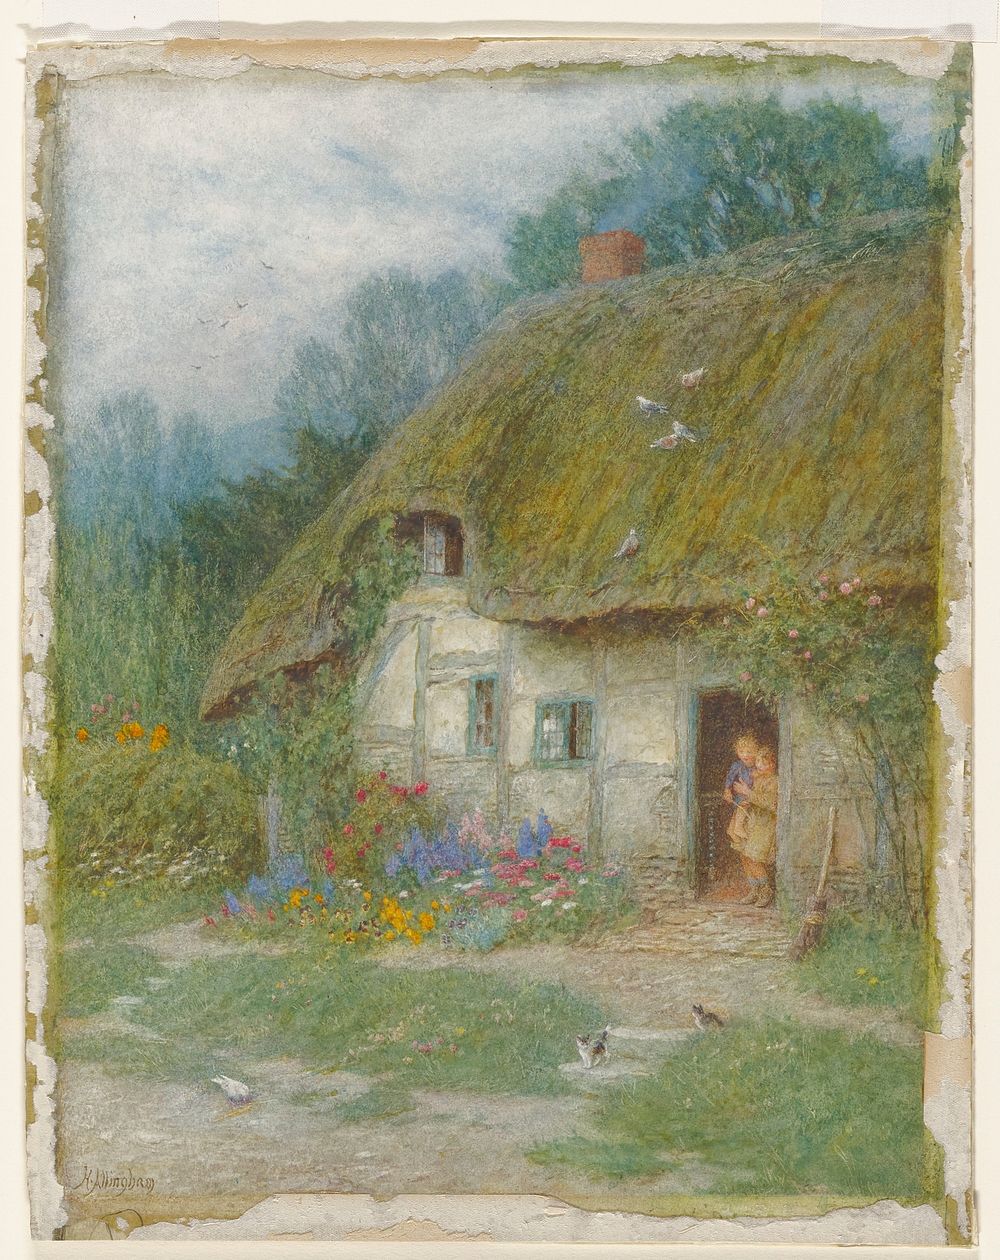 two children (larger child holding smaller) in the open doorway of a small cottage with thatch roof; birds on roof; two…